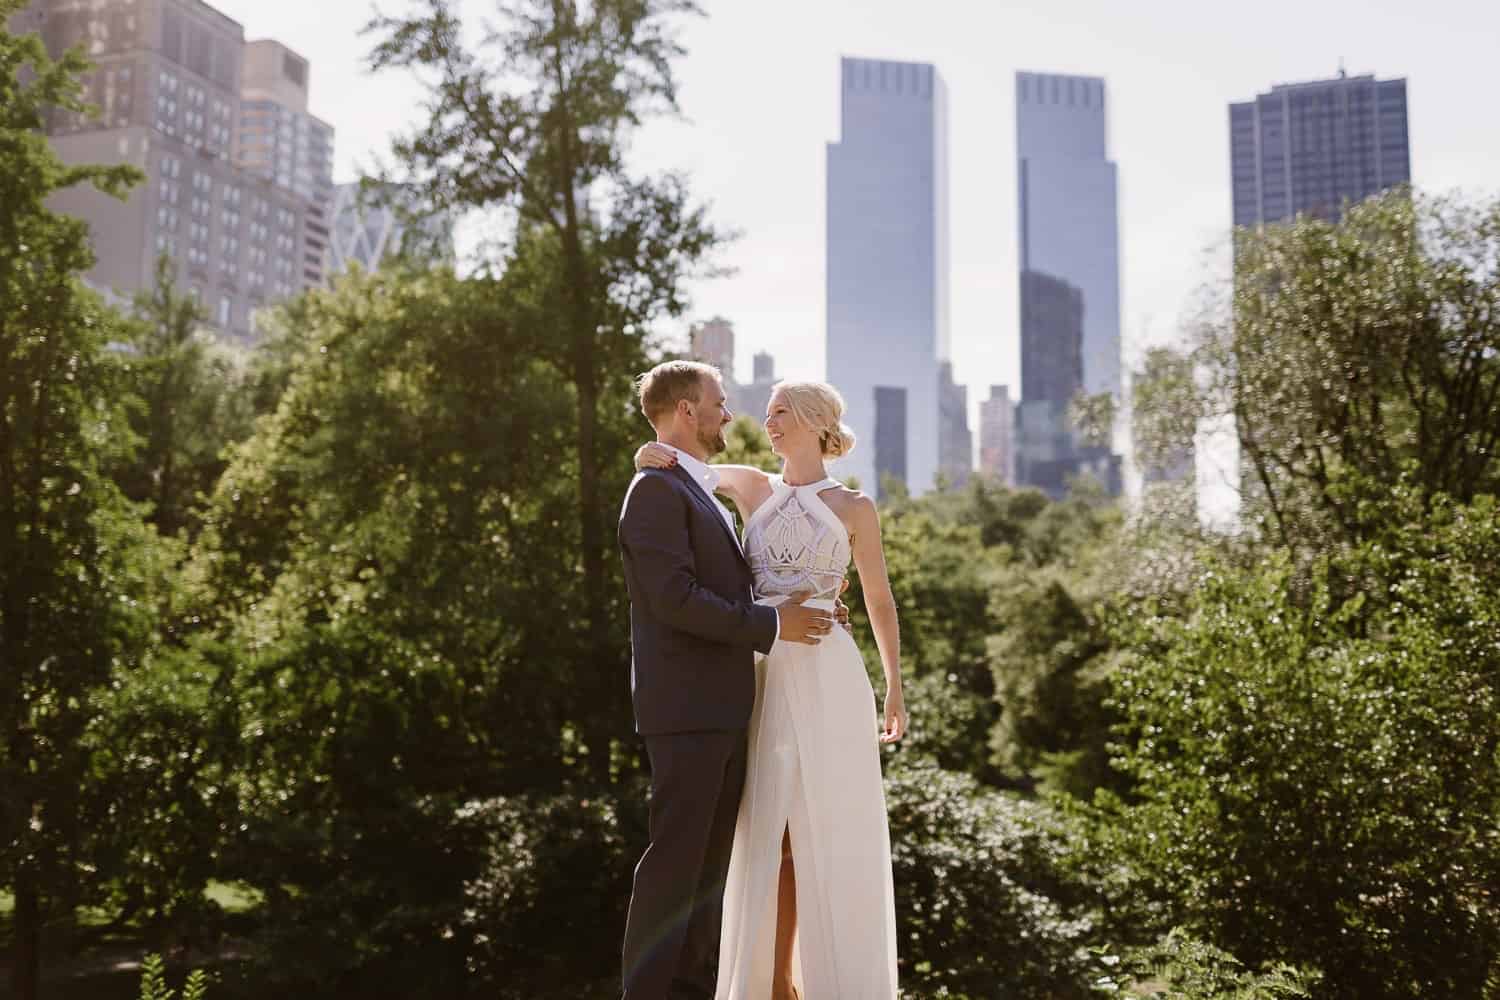 NYC Elopement, NYC Elopement Photographer, NYC City Hall Wedding, Lovely Bride NYC, Central Park Wedding, Central Park Boathouse, Central Park Boathouse Wedding, Central Park Engagement Photos, Brooklyn Wedding Photographer, Brooklyn Wedding, NYC Wedding, NYC Wedding Photographer, Sass & Bride, Sarah Seven, Jimmy Choo, manolo blahnik, Wythe Hotel, Wythe Hotel Wedding, Wedding Inspiration, Wedding Dress Ideas, Intimate wedding, ladies pavilion, cop cot central park, cop cot wedding